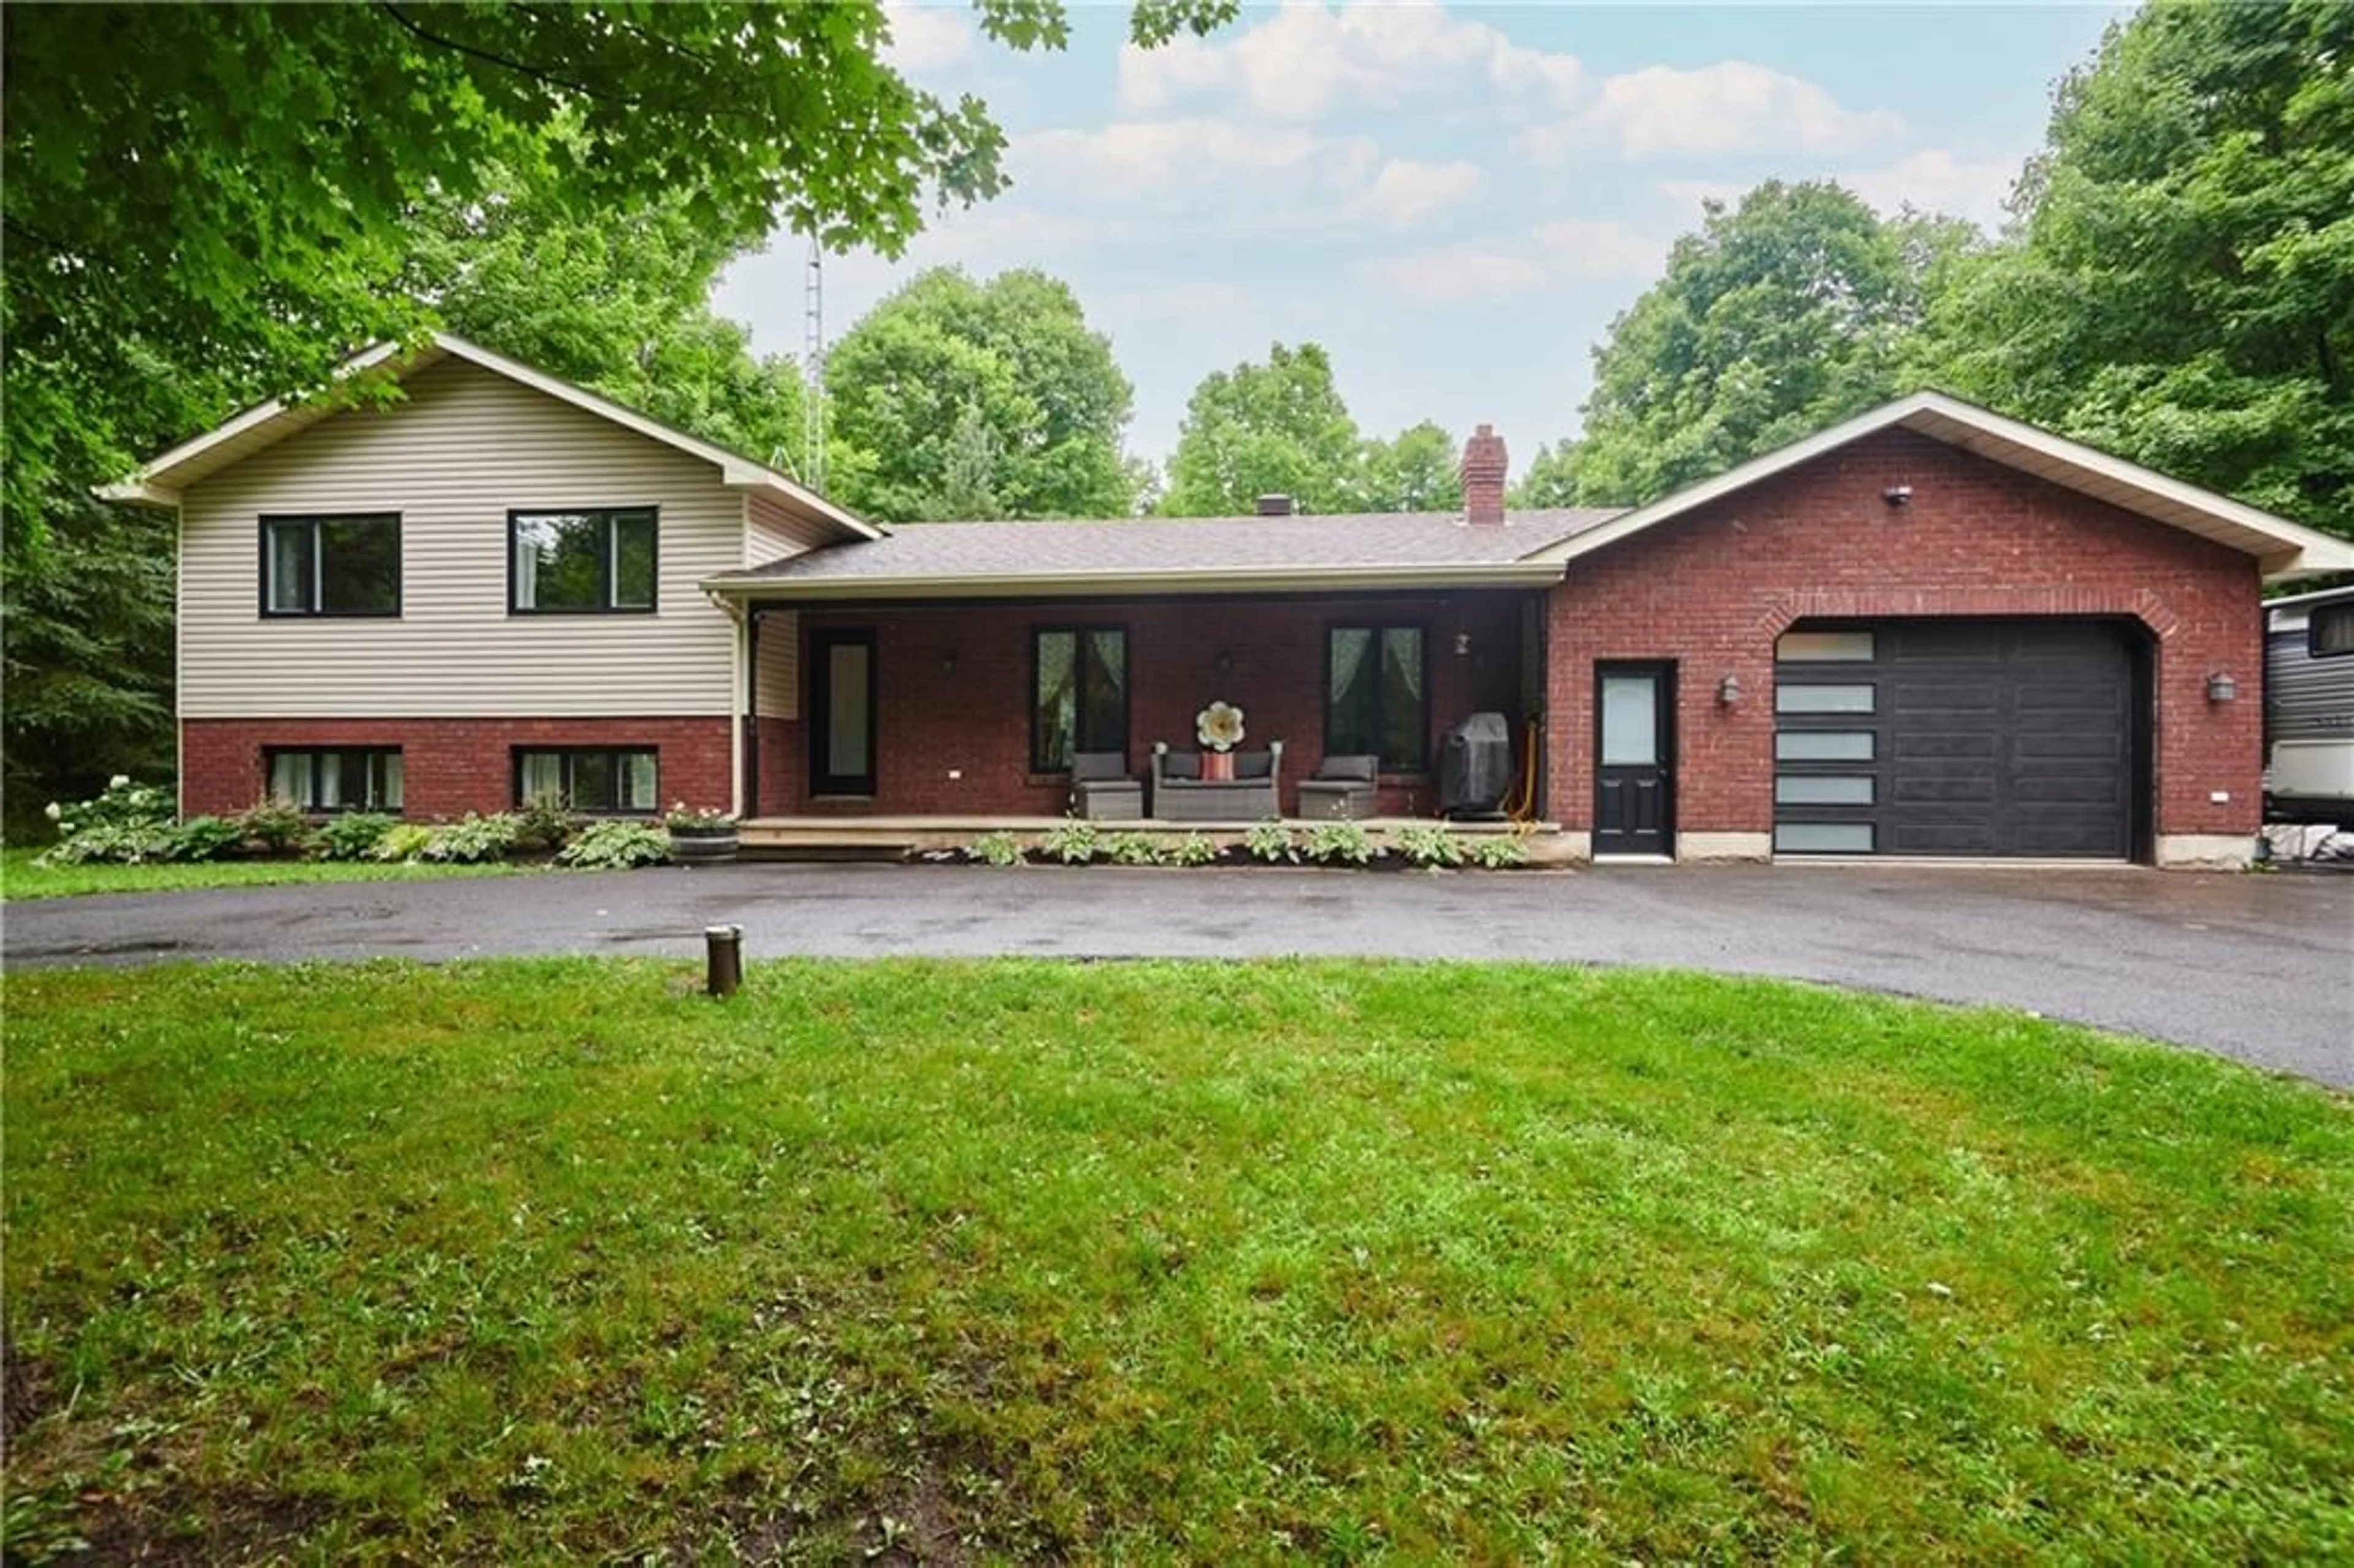 Home with brick exterior material for 4814 DELANEY Rd, Martintown Ontario K0C 1S0